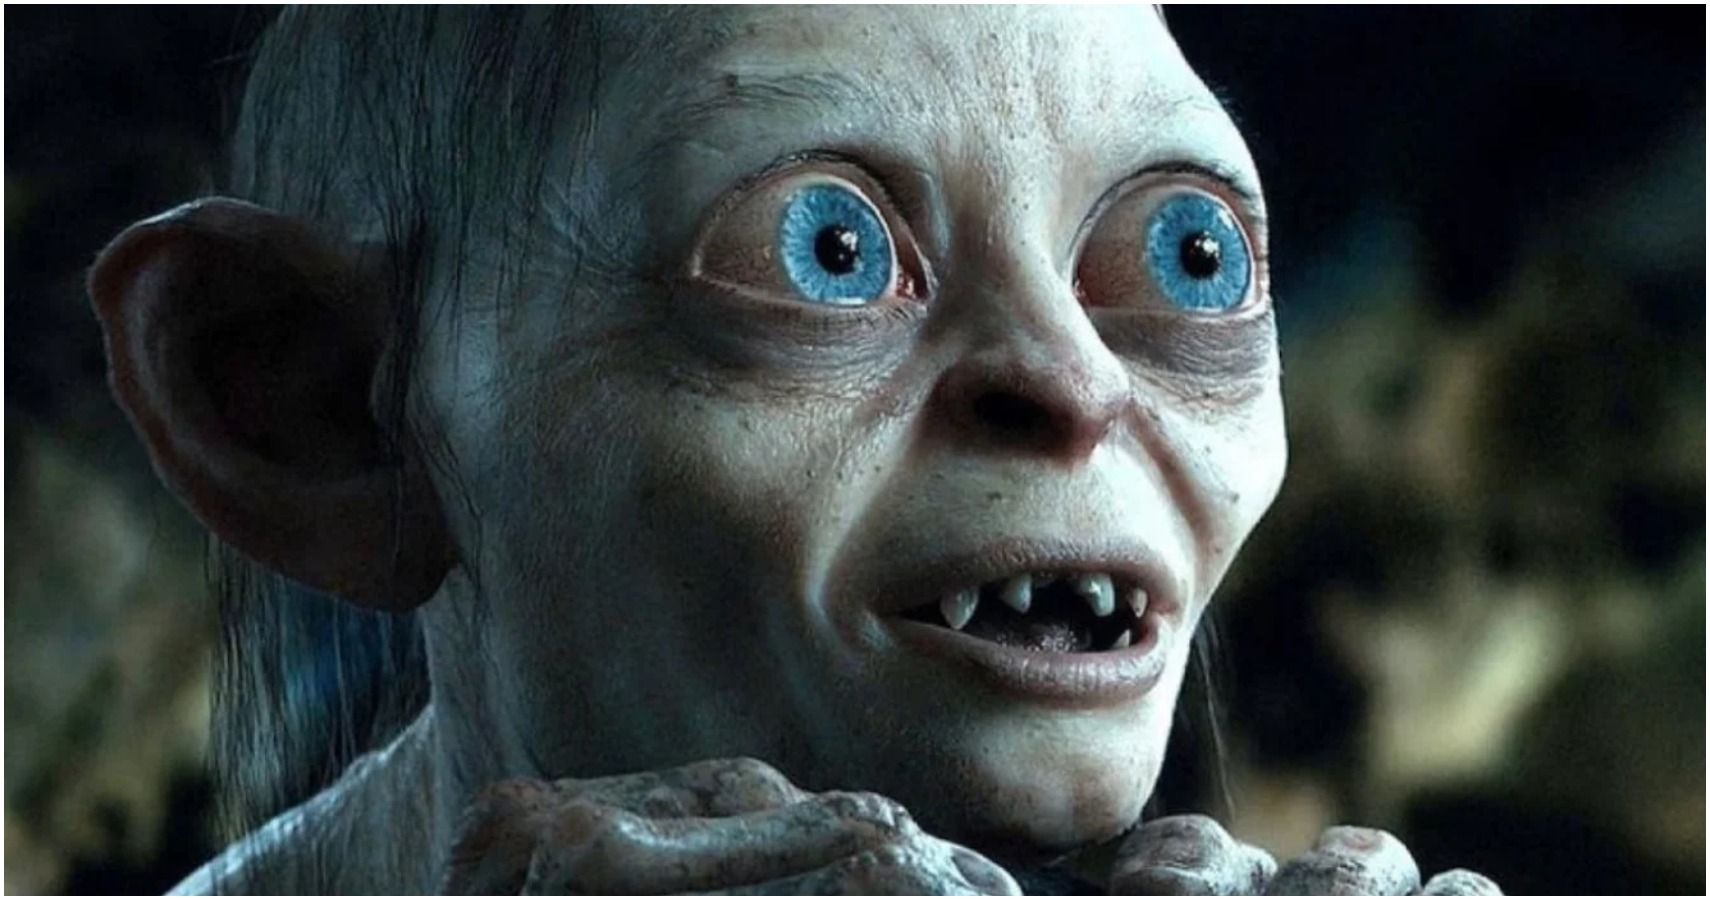 gollum from the lord of the rings